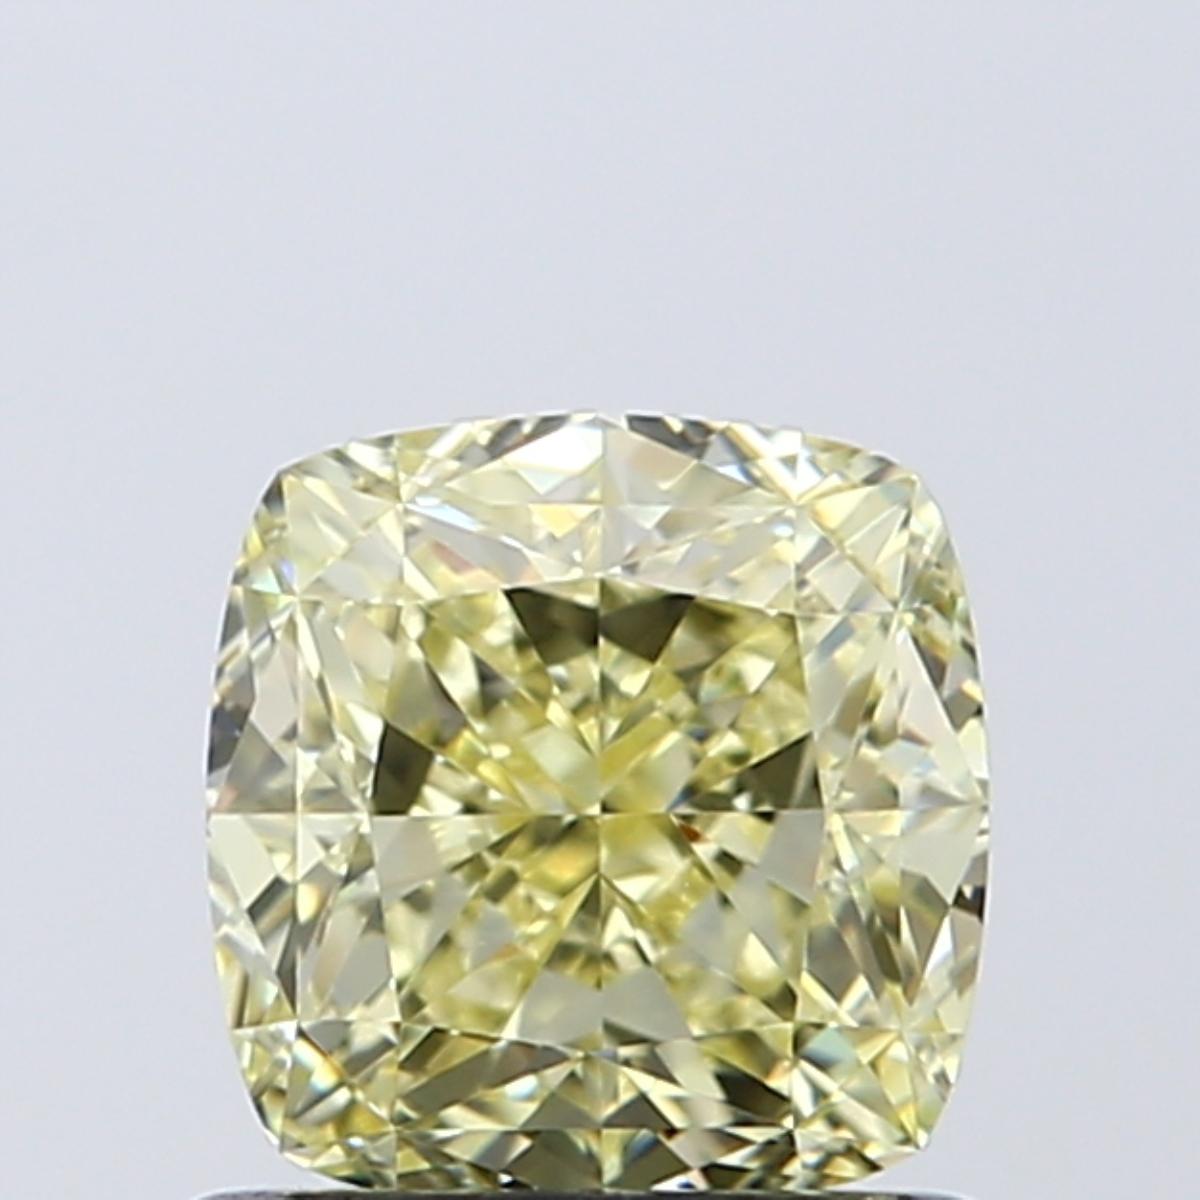 GIA Certified 1.00-1.05 Carat VVS2, Fancy Yellow, Cushion Cut, Natural Diamond

Perfect Yellow Color Diamonds for perfect gifts.

5 C's:
Certificate: GIA
Carat: 1.00-1.05ct
Color: Natural Fancy Yellow
Clarity: VVS2(Very Very Slightly Included)
Cut: